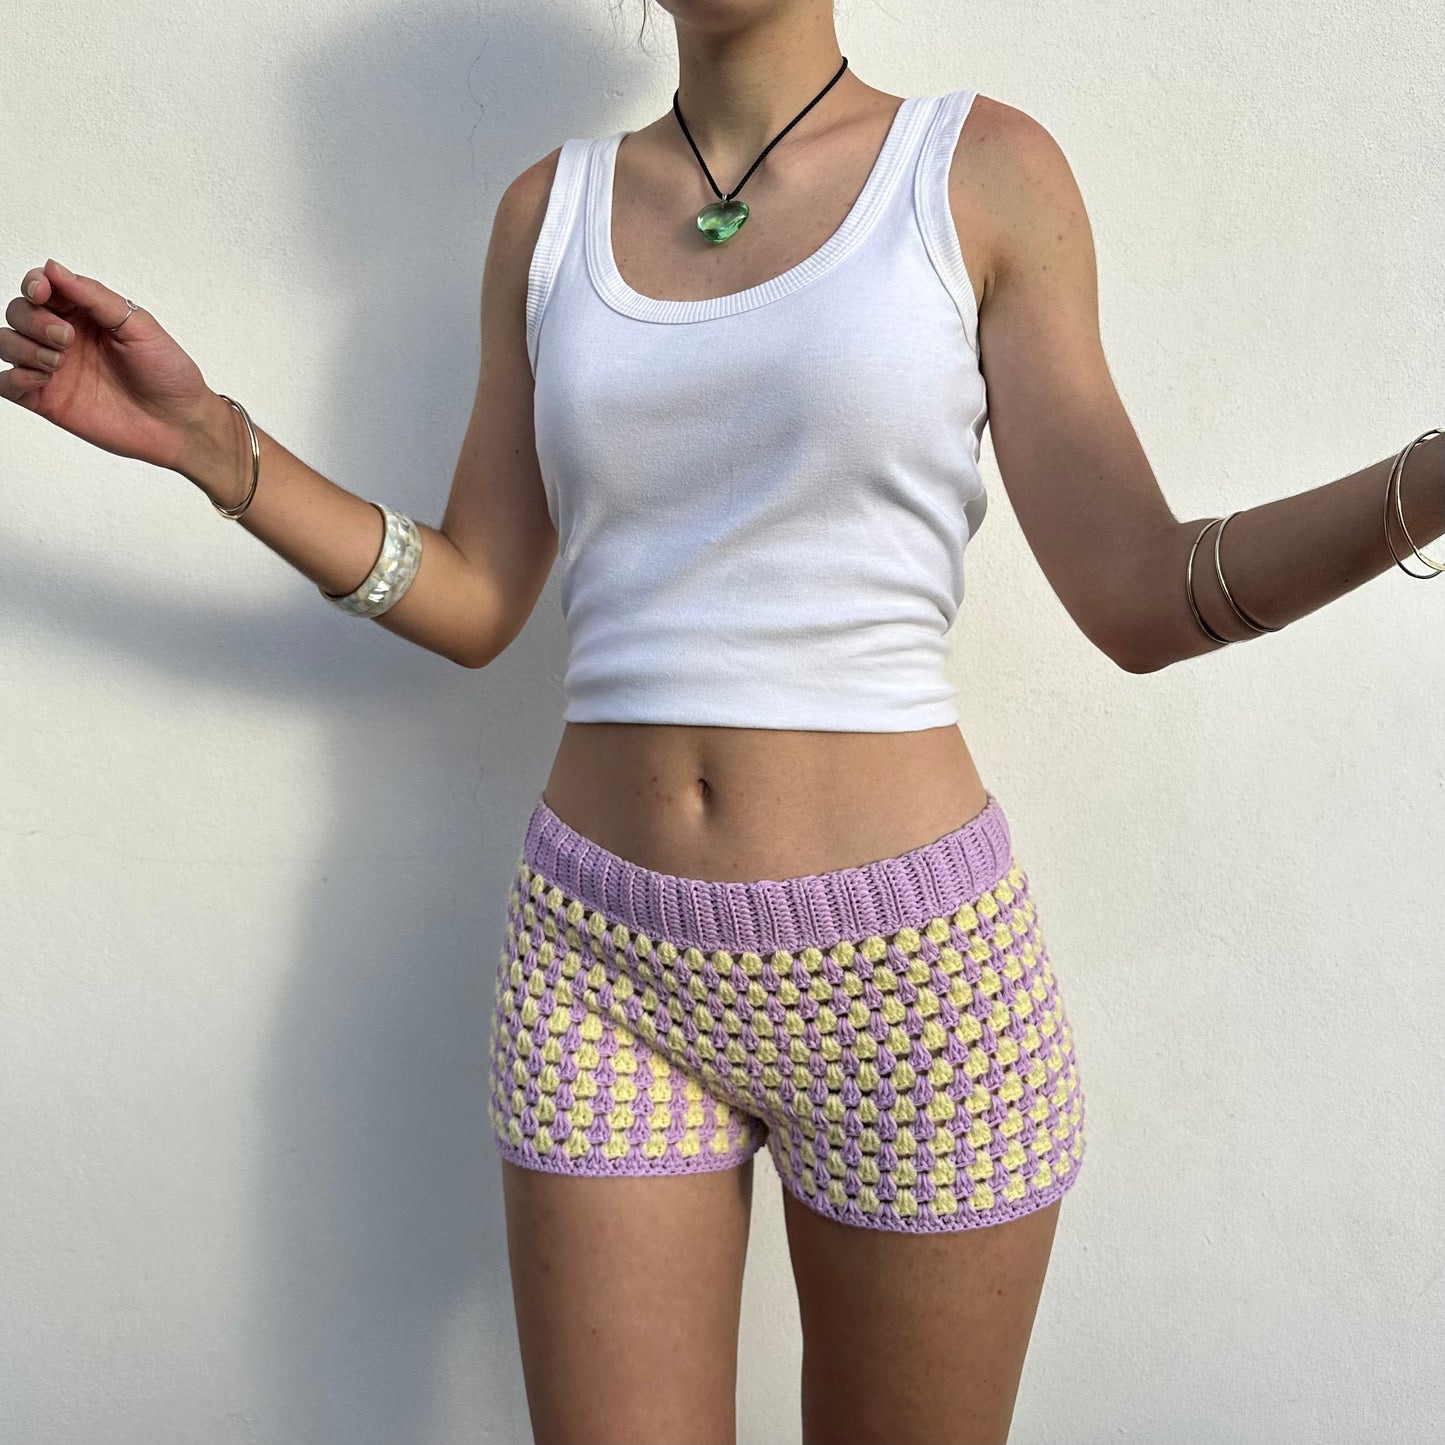 Handmade gingham crochet shorts in lilac and yellow